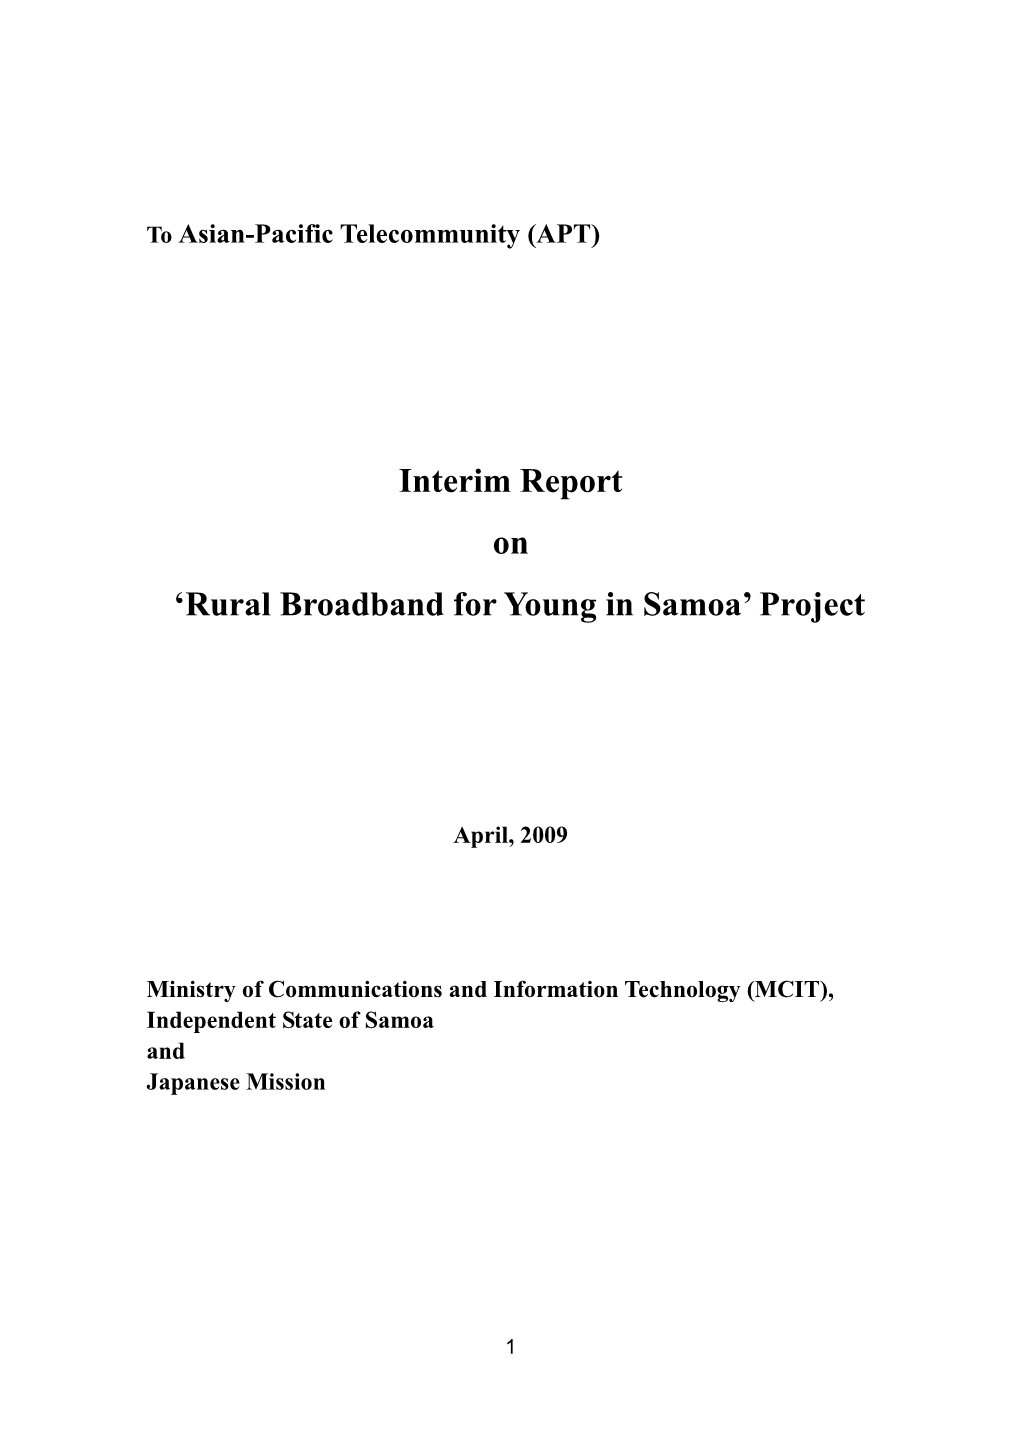 'Rural Broadband for Young in Samoa' Project